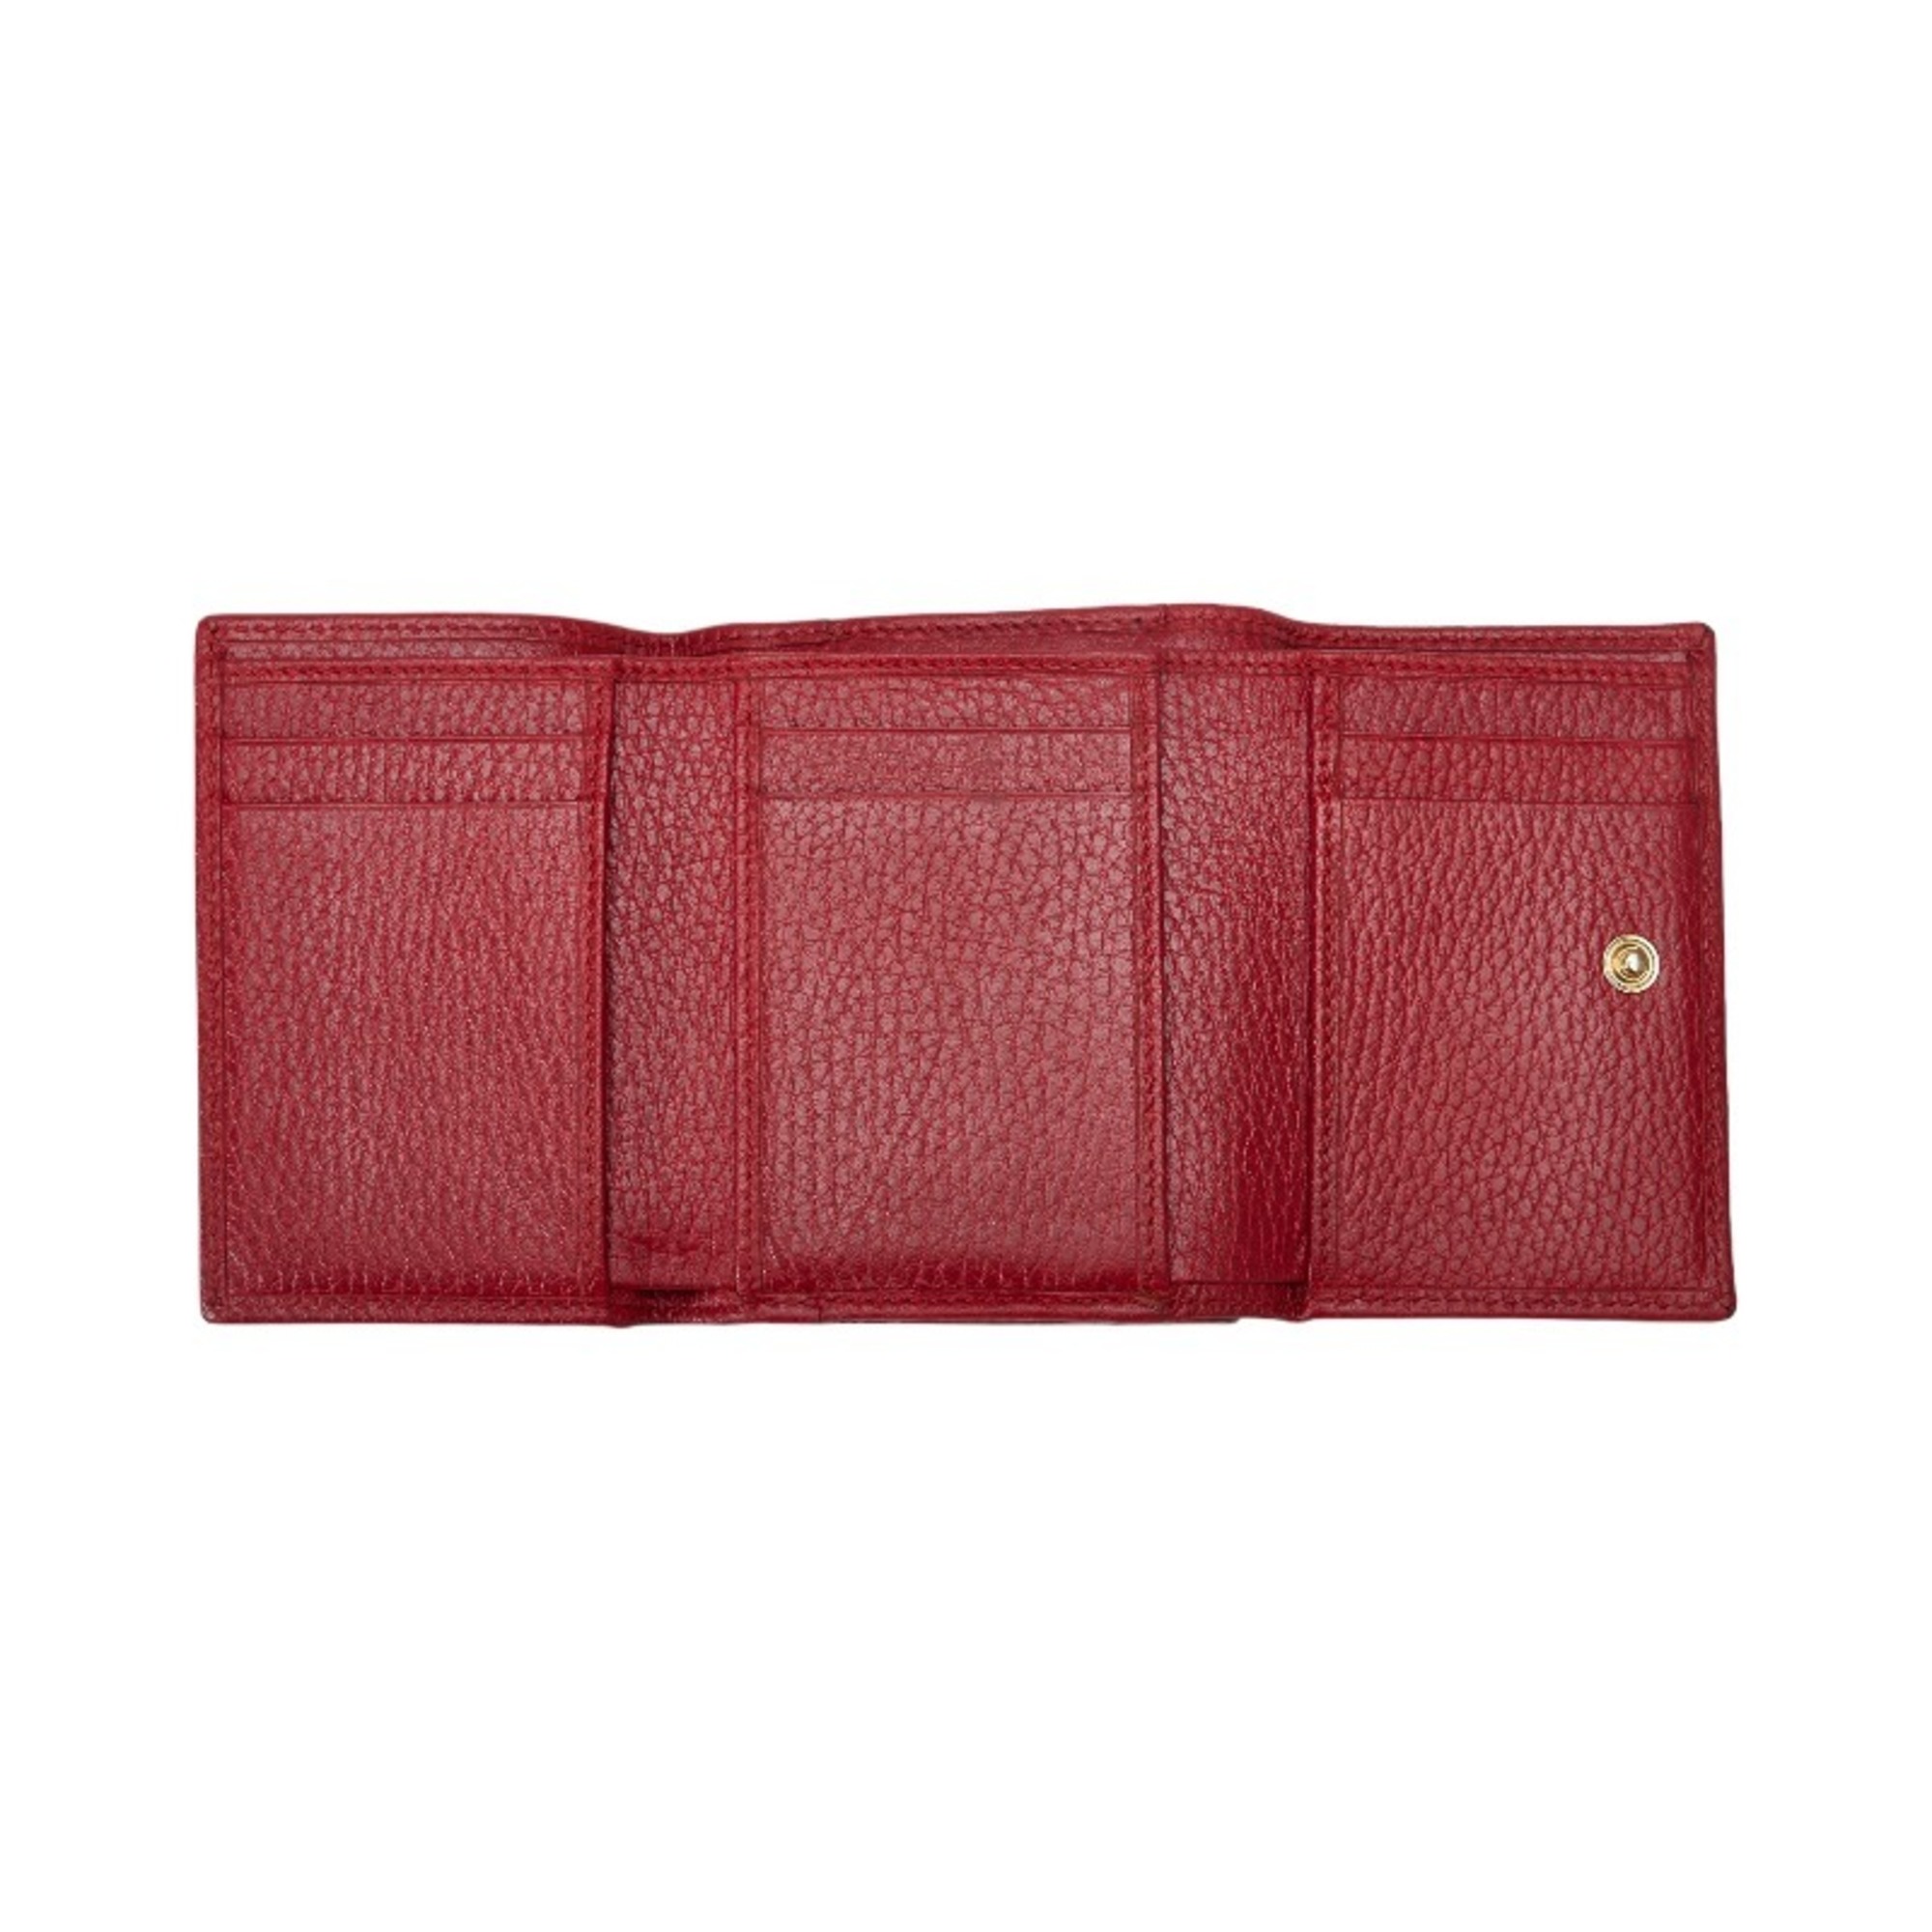 Gucci GG Marmont Trifold Wallet Compact 474746 Red Leather Women's GUCCI